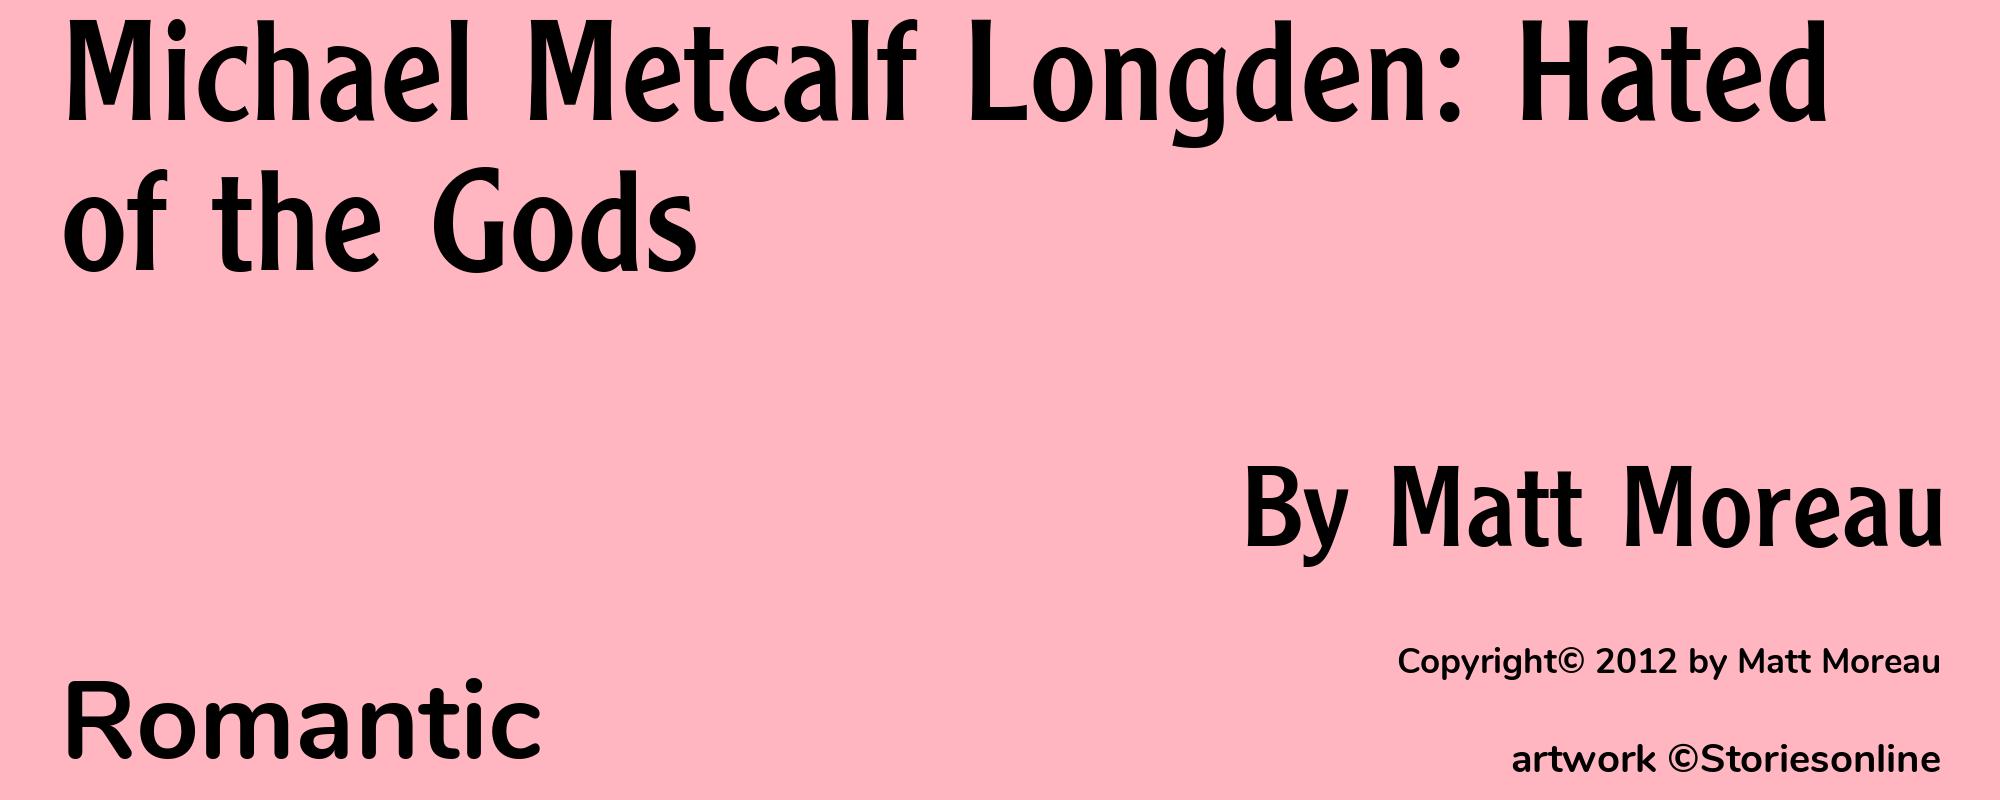 Michael Metcalf Longden: Hated of the Gods - Cover